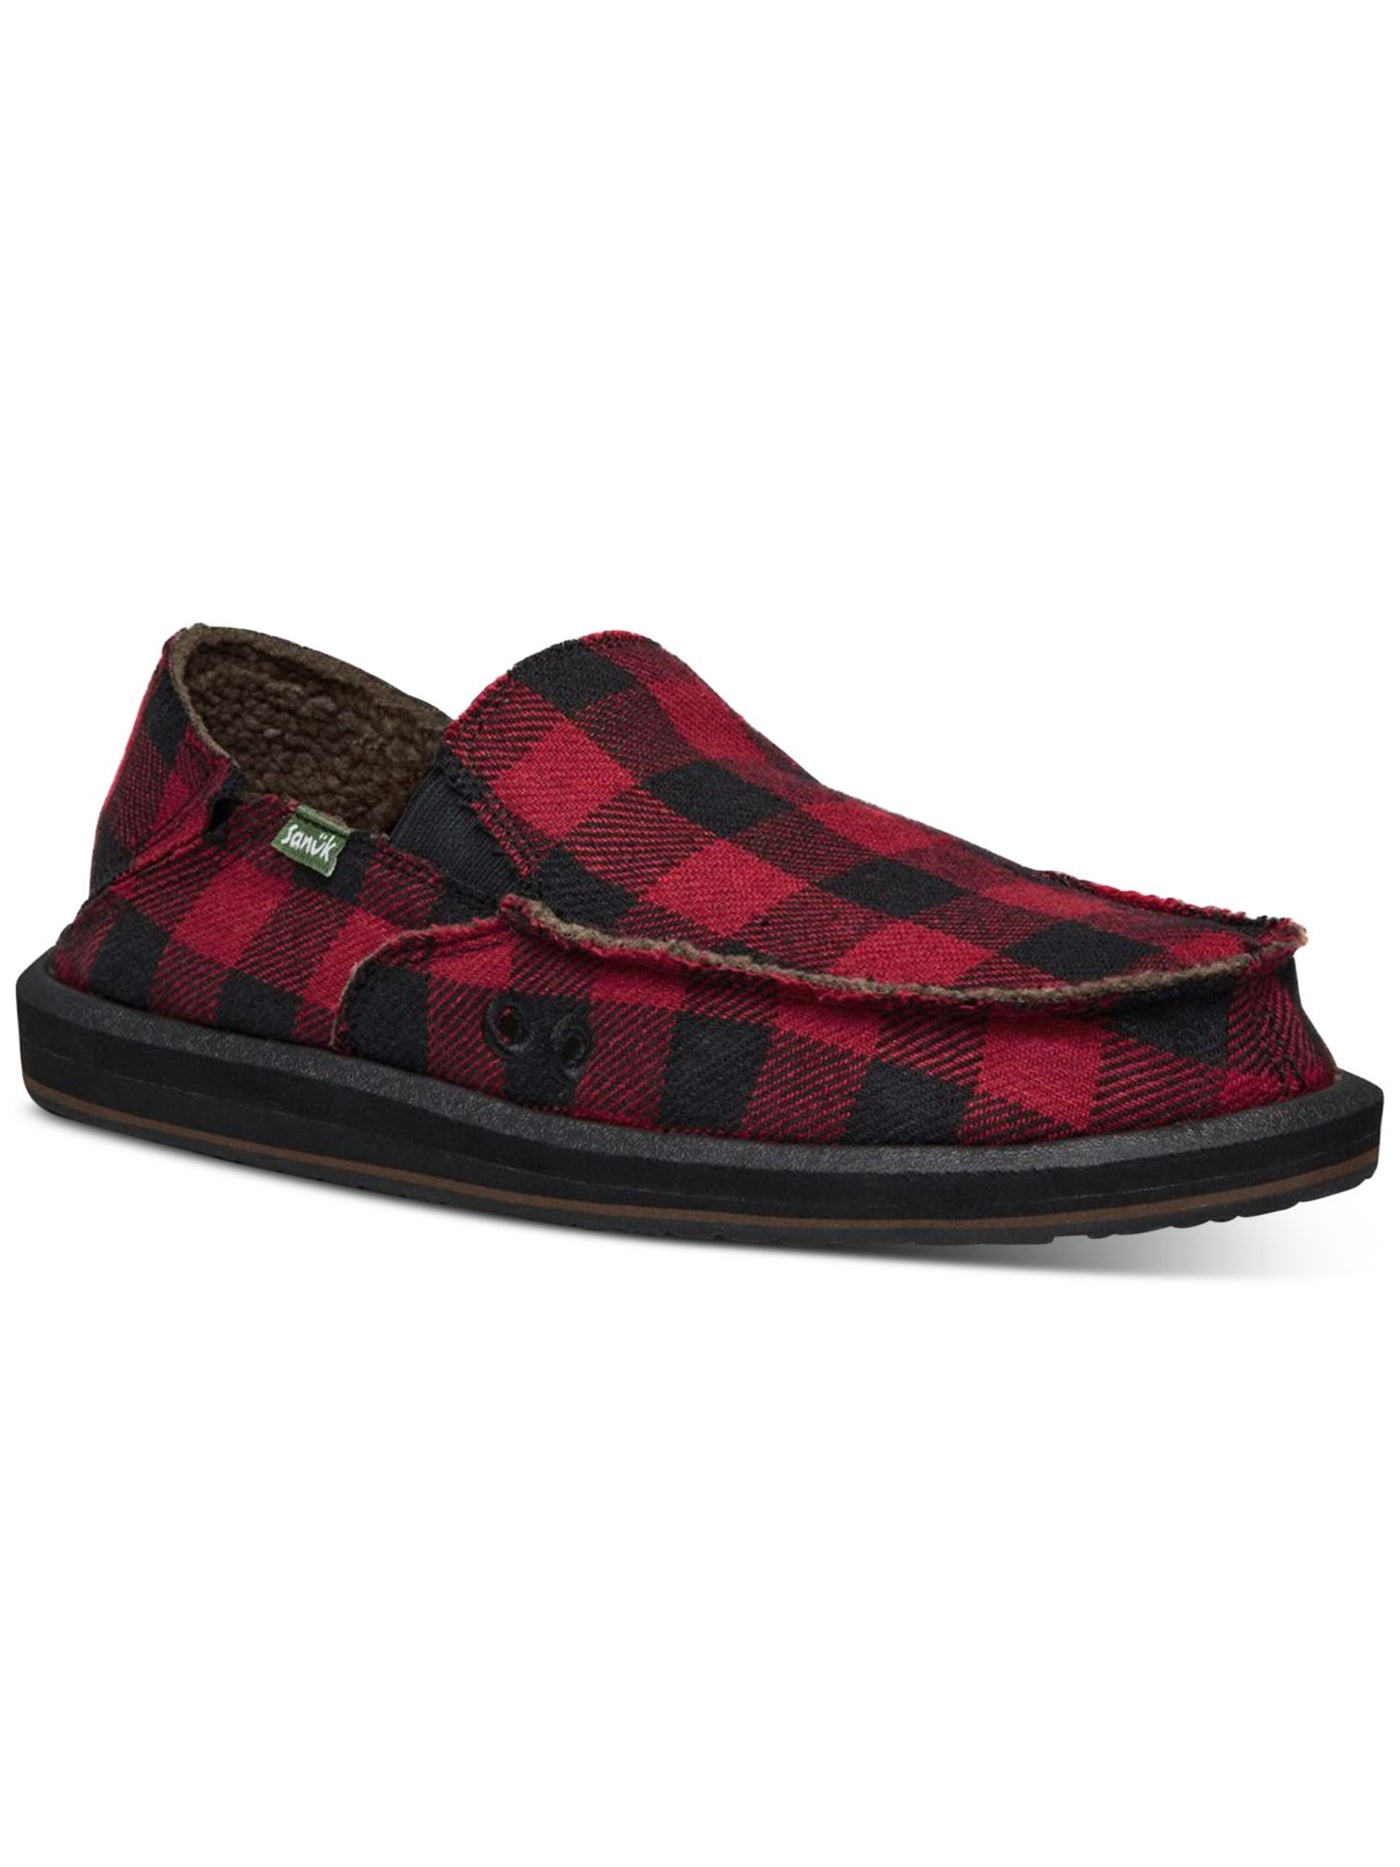 SANUK Mens Red Plaid Buffalo Padded Goring Comfort Vagabond Chill Round Toe Slip On Loafers Shoes 11